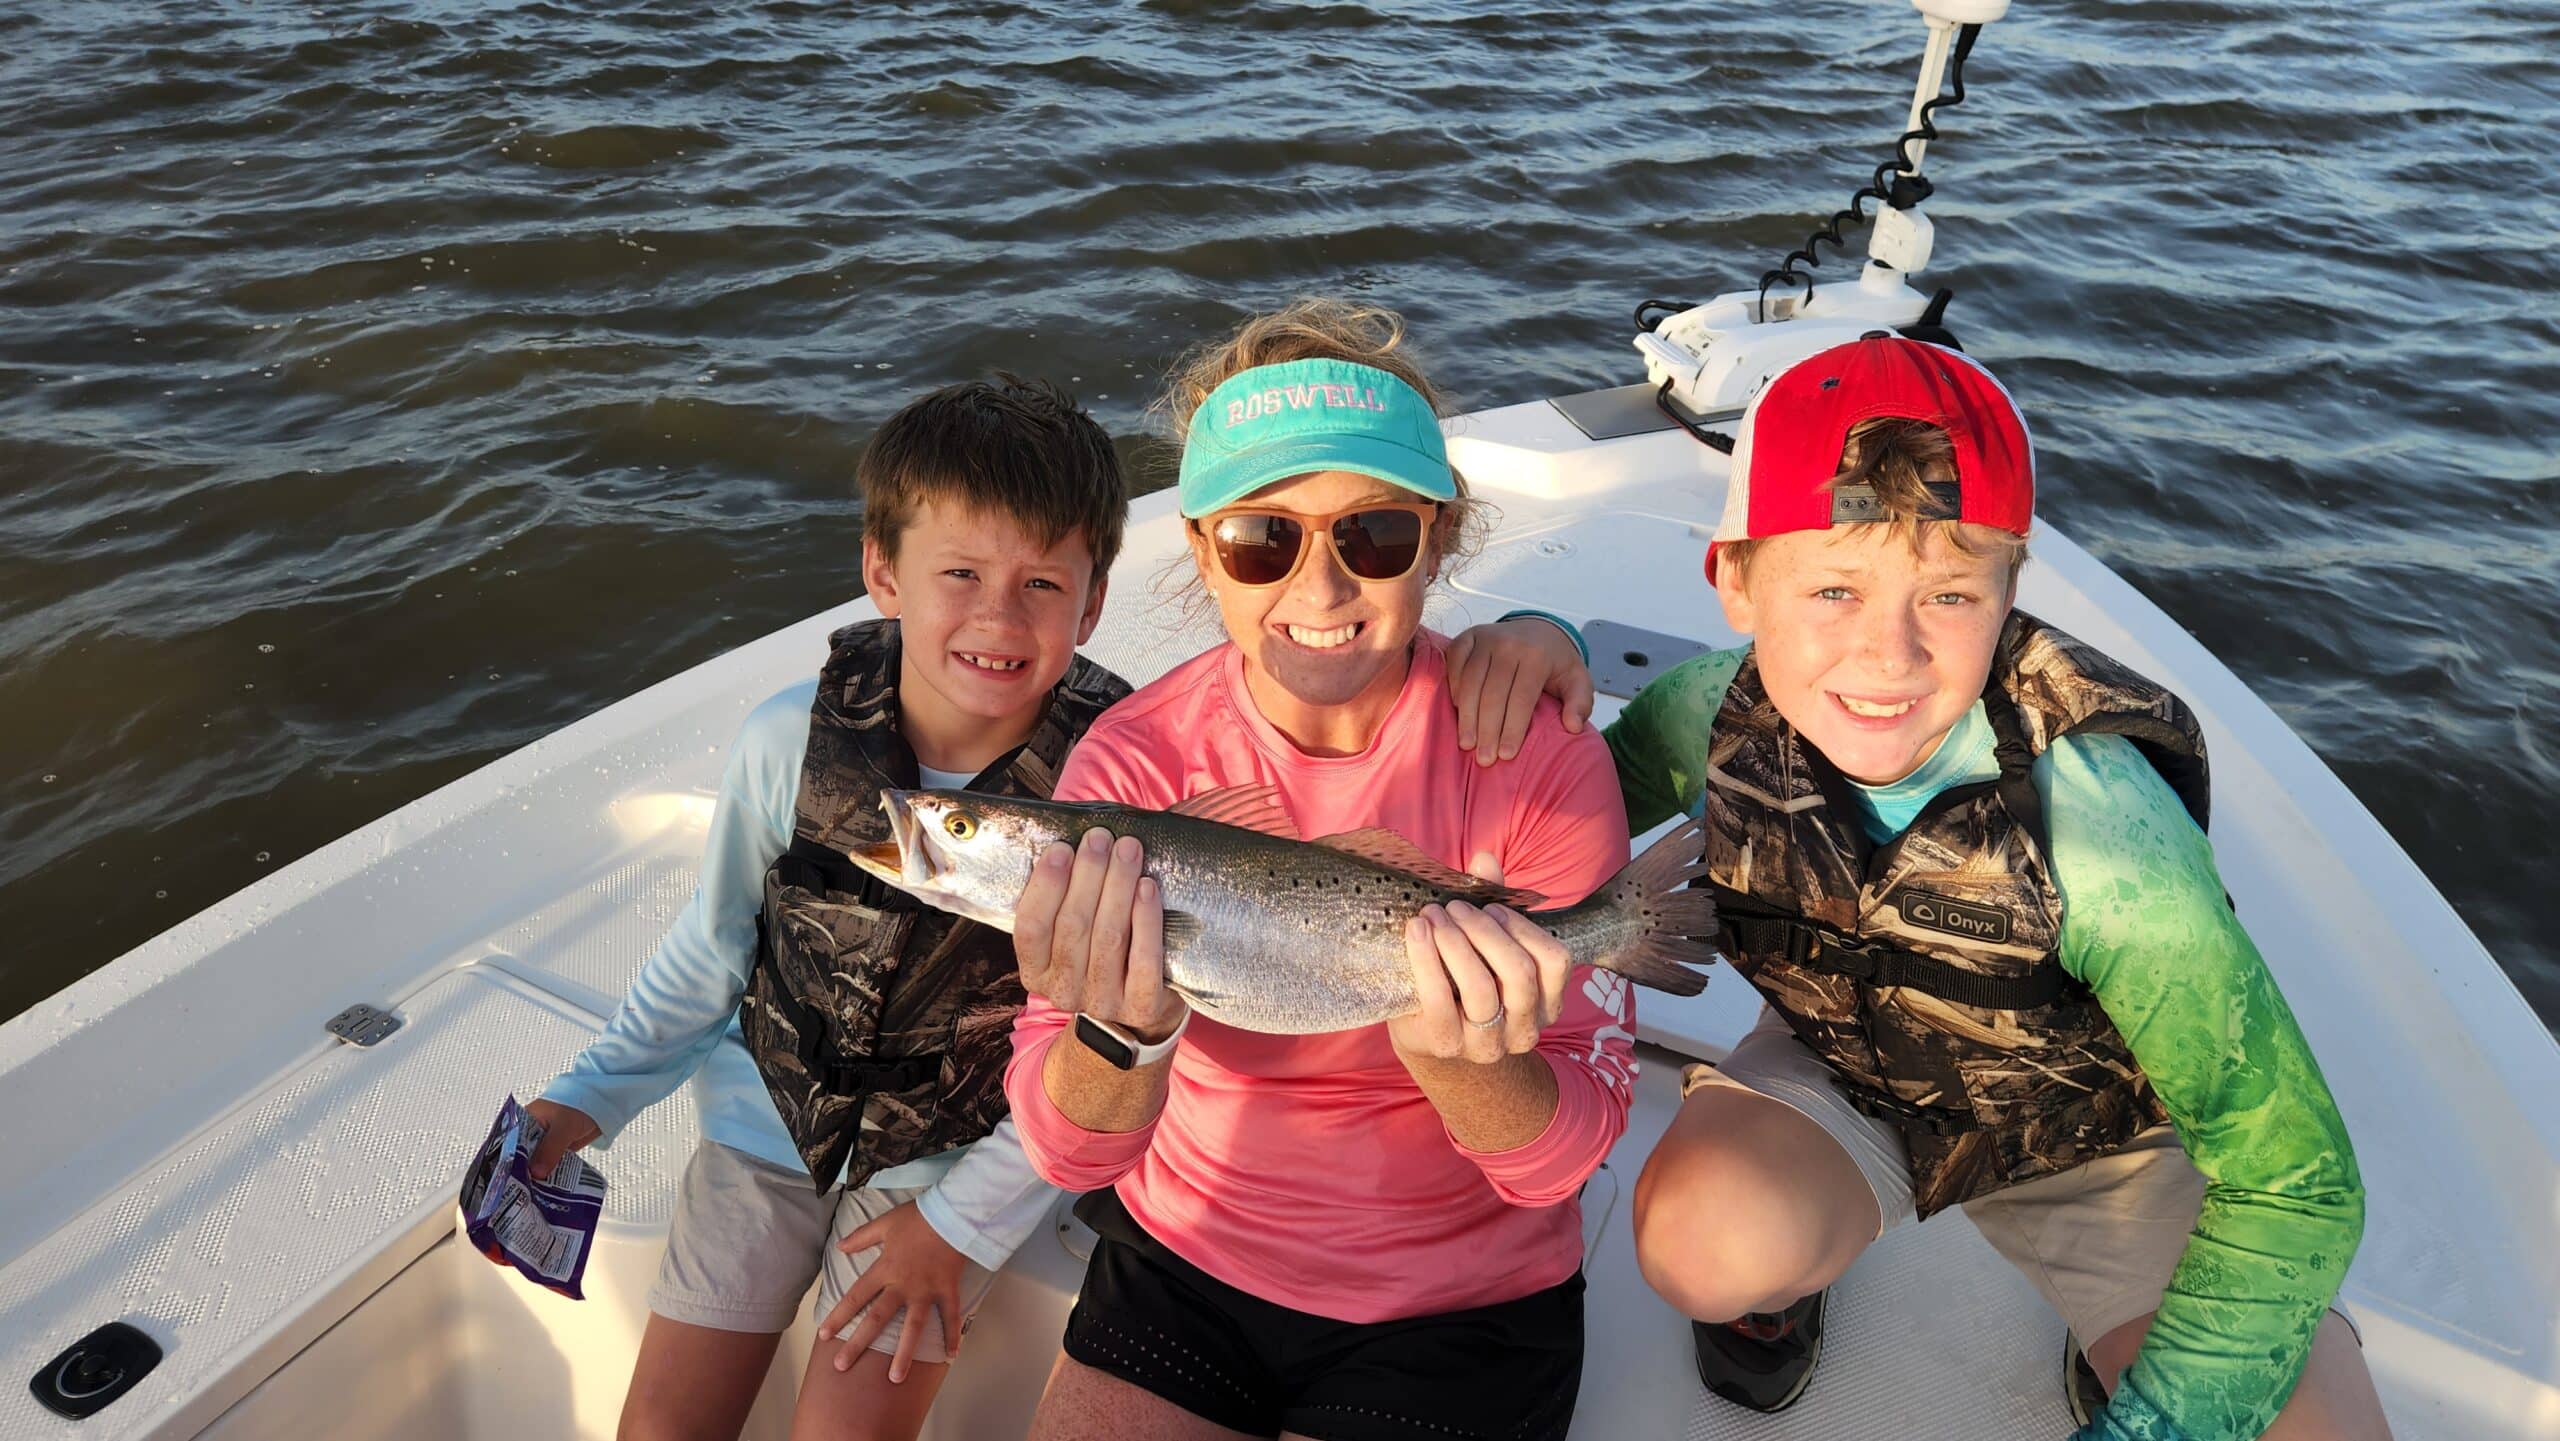 mom and kids fishing in myrtle beach, sc